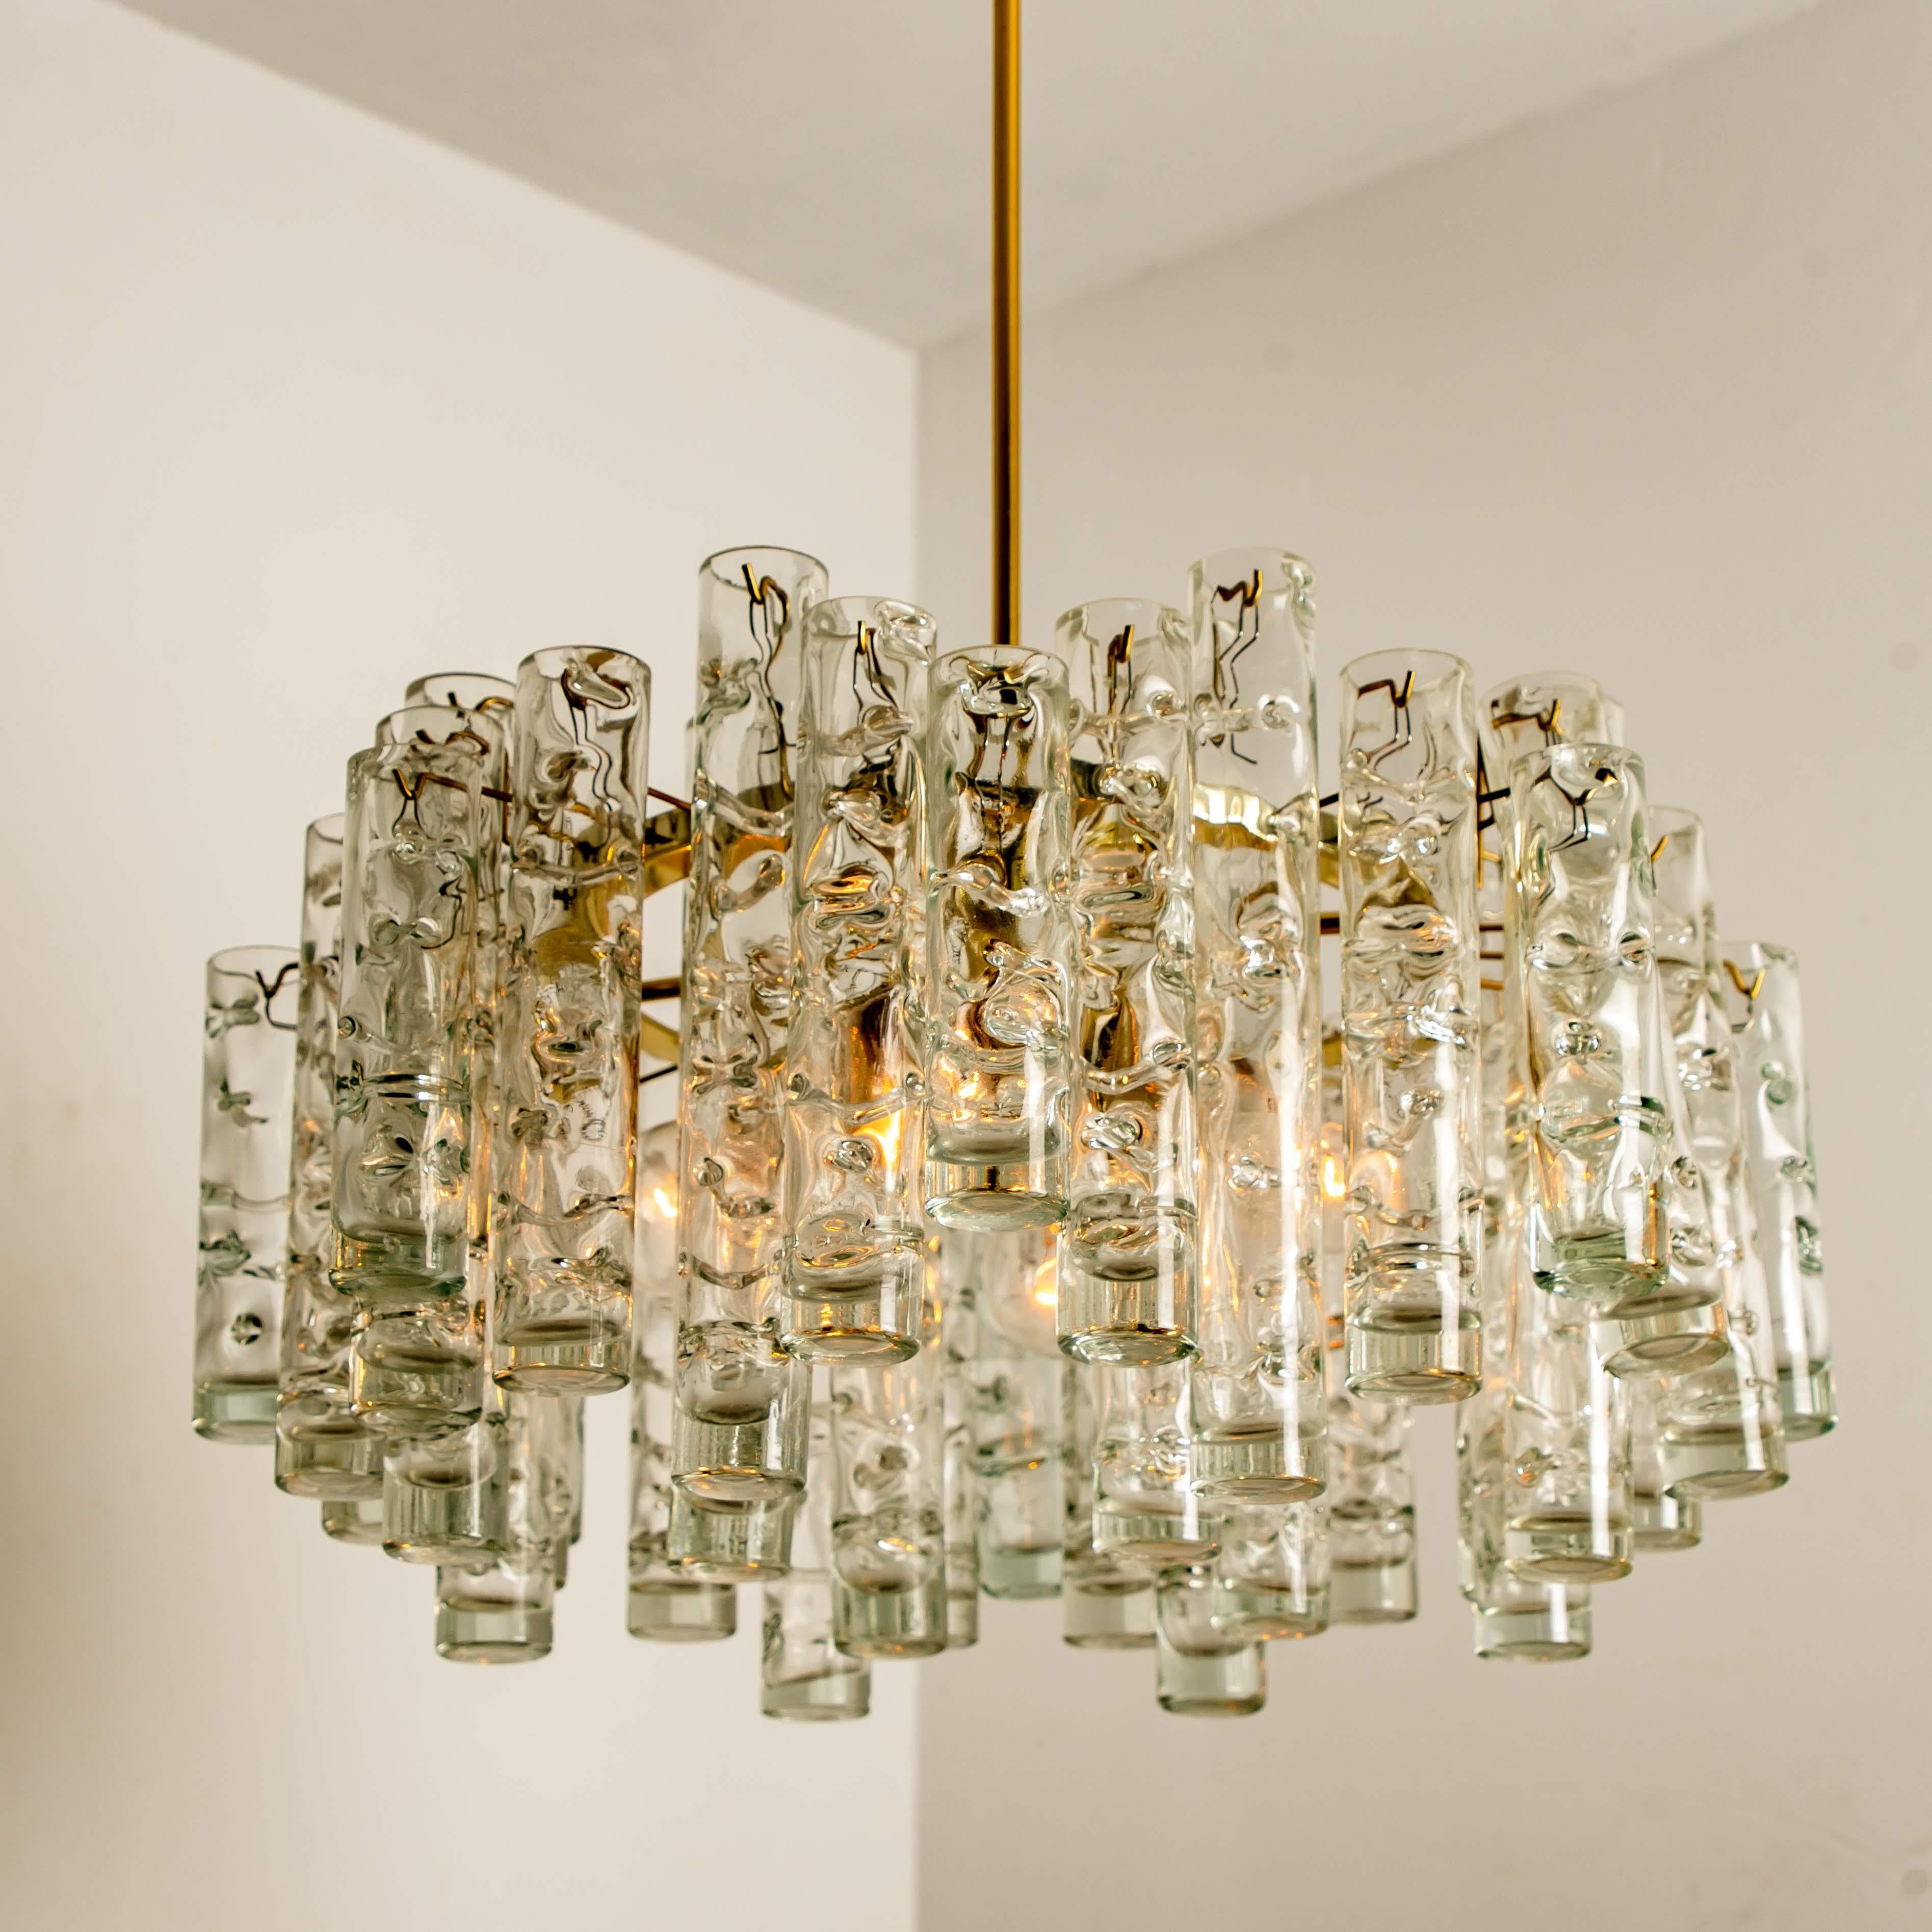 Amazing Doria light fixture. Beautiful craftmanship from the midcentury. The light fixture features a frame with brass details and large hand blown glass tubes. The glass has a nice pattern in it, what gives a nice diffuse light effect and a nice